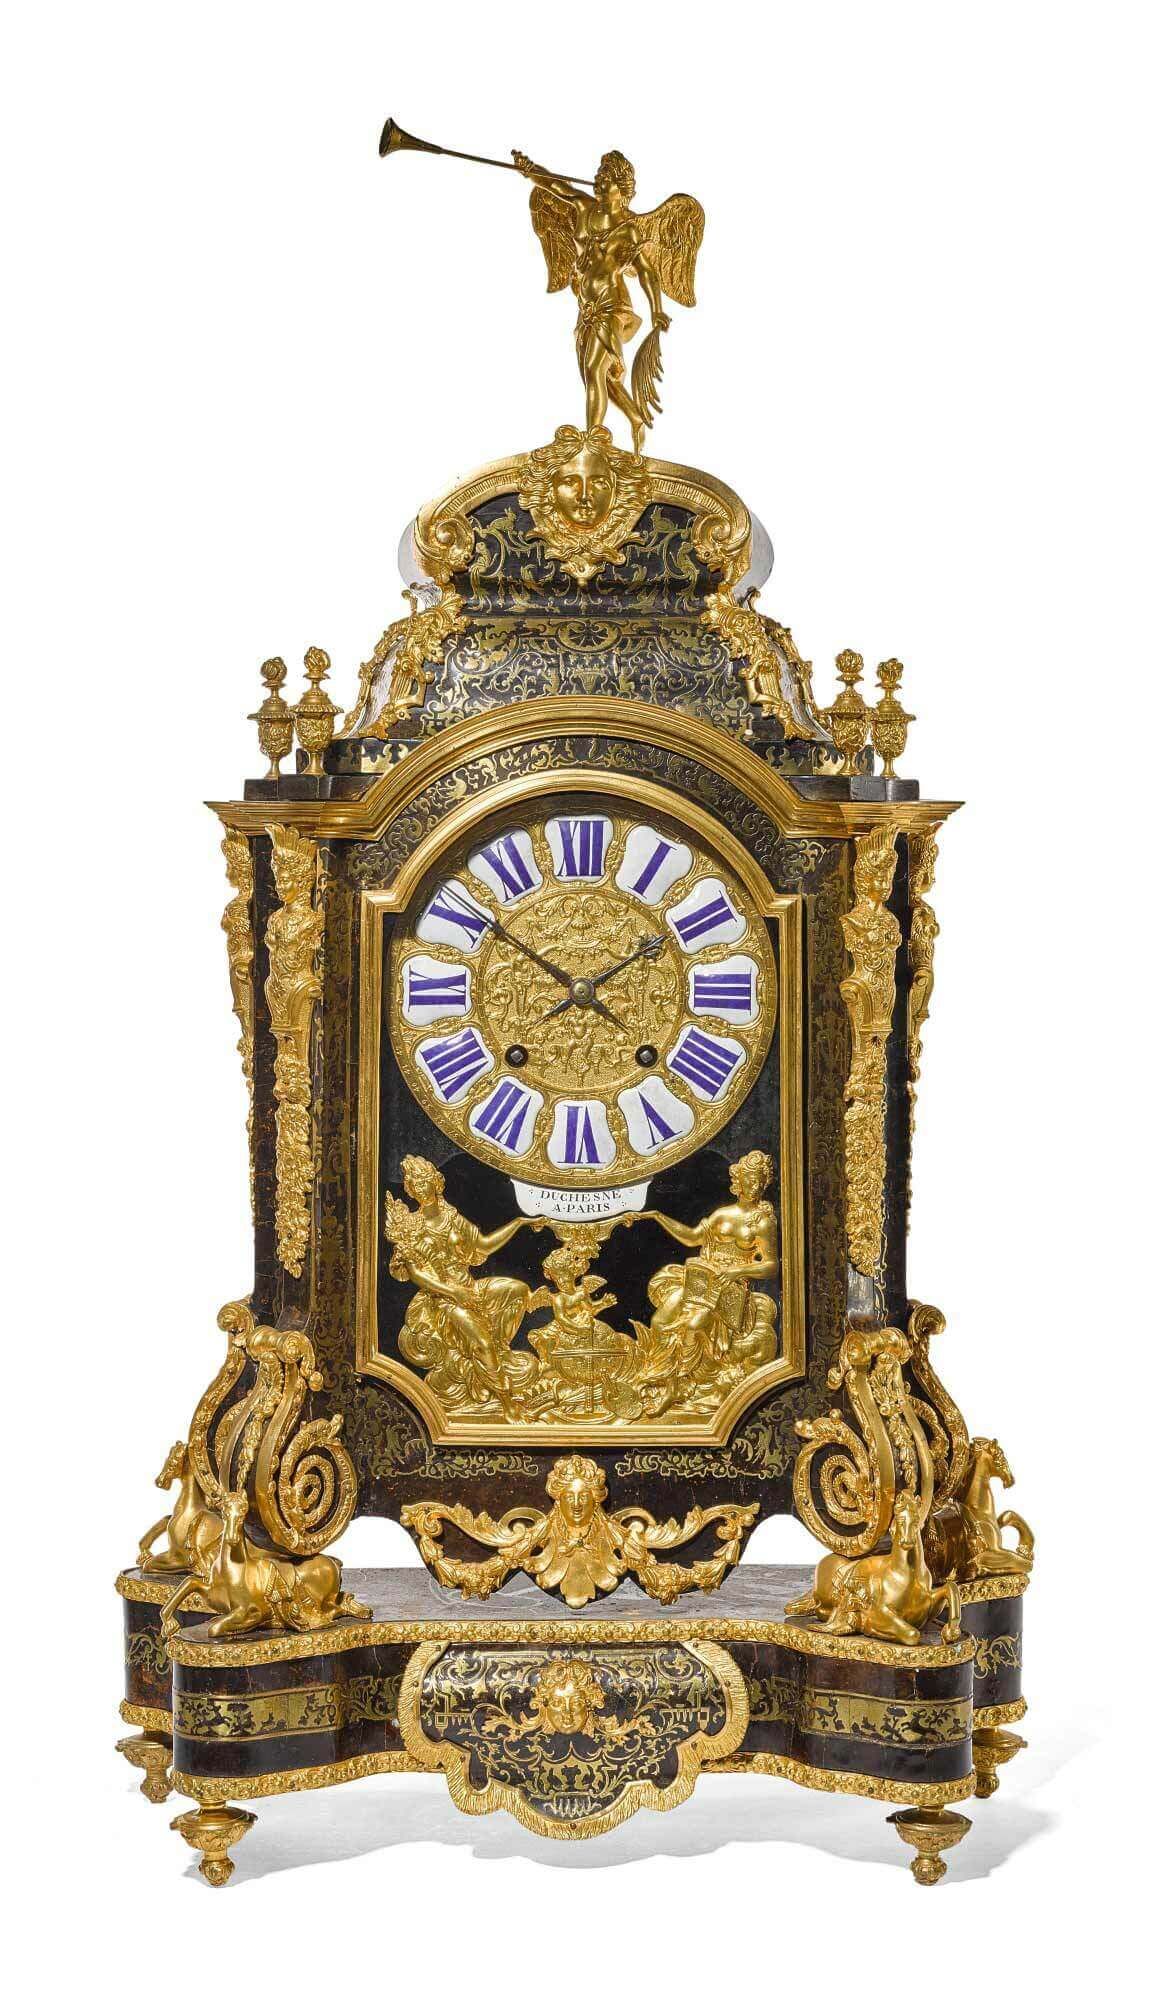 A Louis XIV ormolu mounted tortoiseshell and brass Boulle-inlaid table clock by Pierre Du Chesne, Paris, circa 1705. Courtesy, Sotheby’s